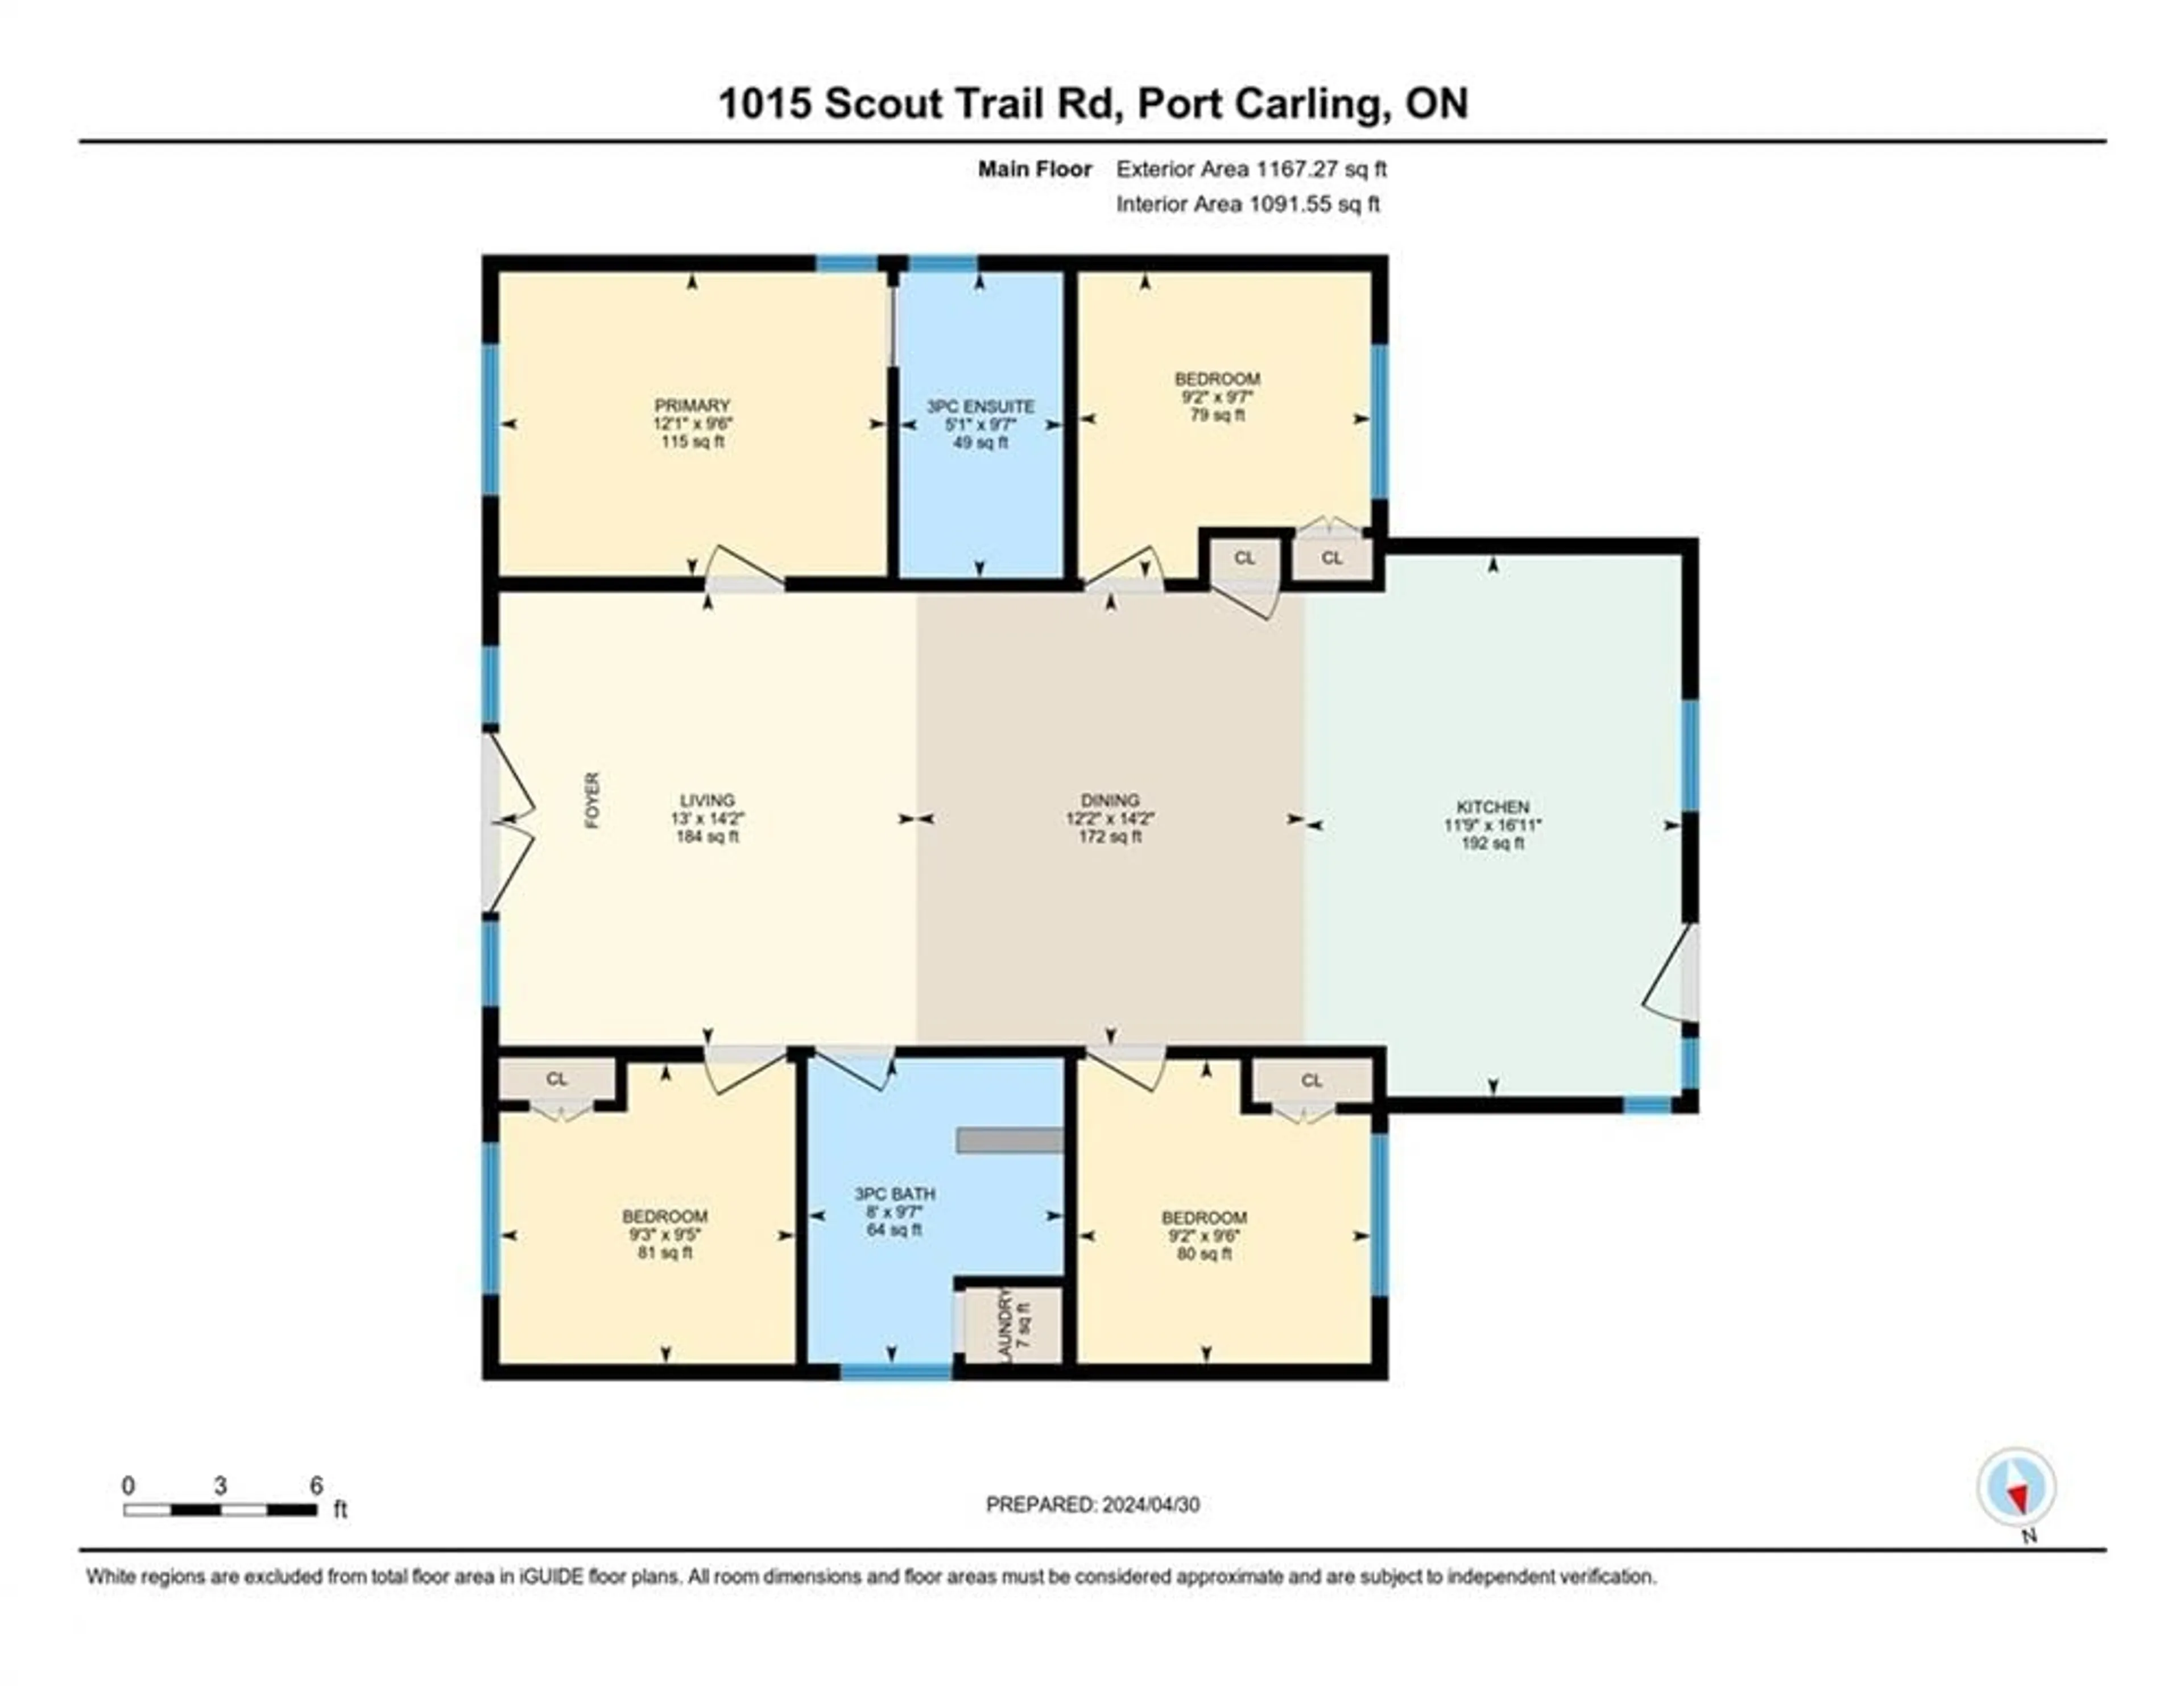 Floor plan for 1015 Scout Trail Rd, Port Carling Ontario P0B 1J0